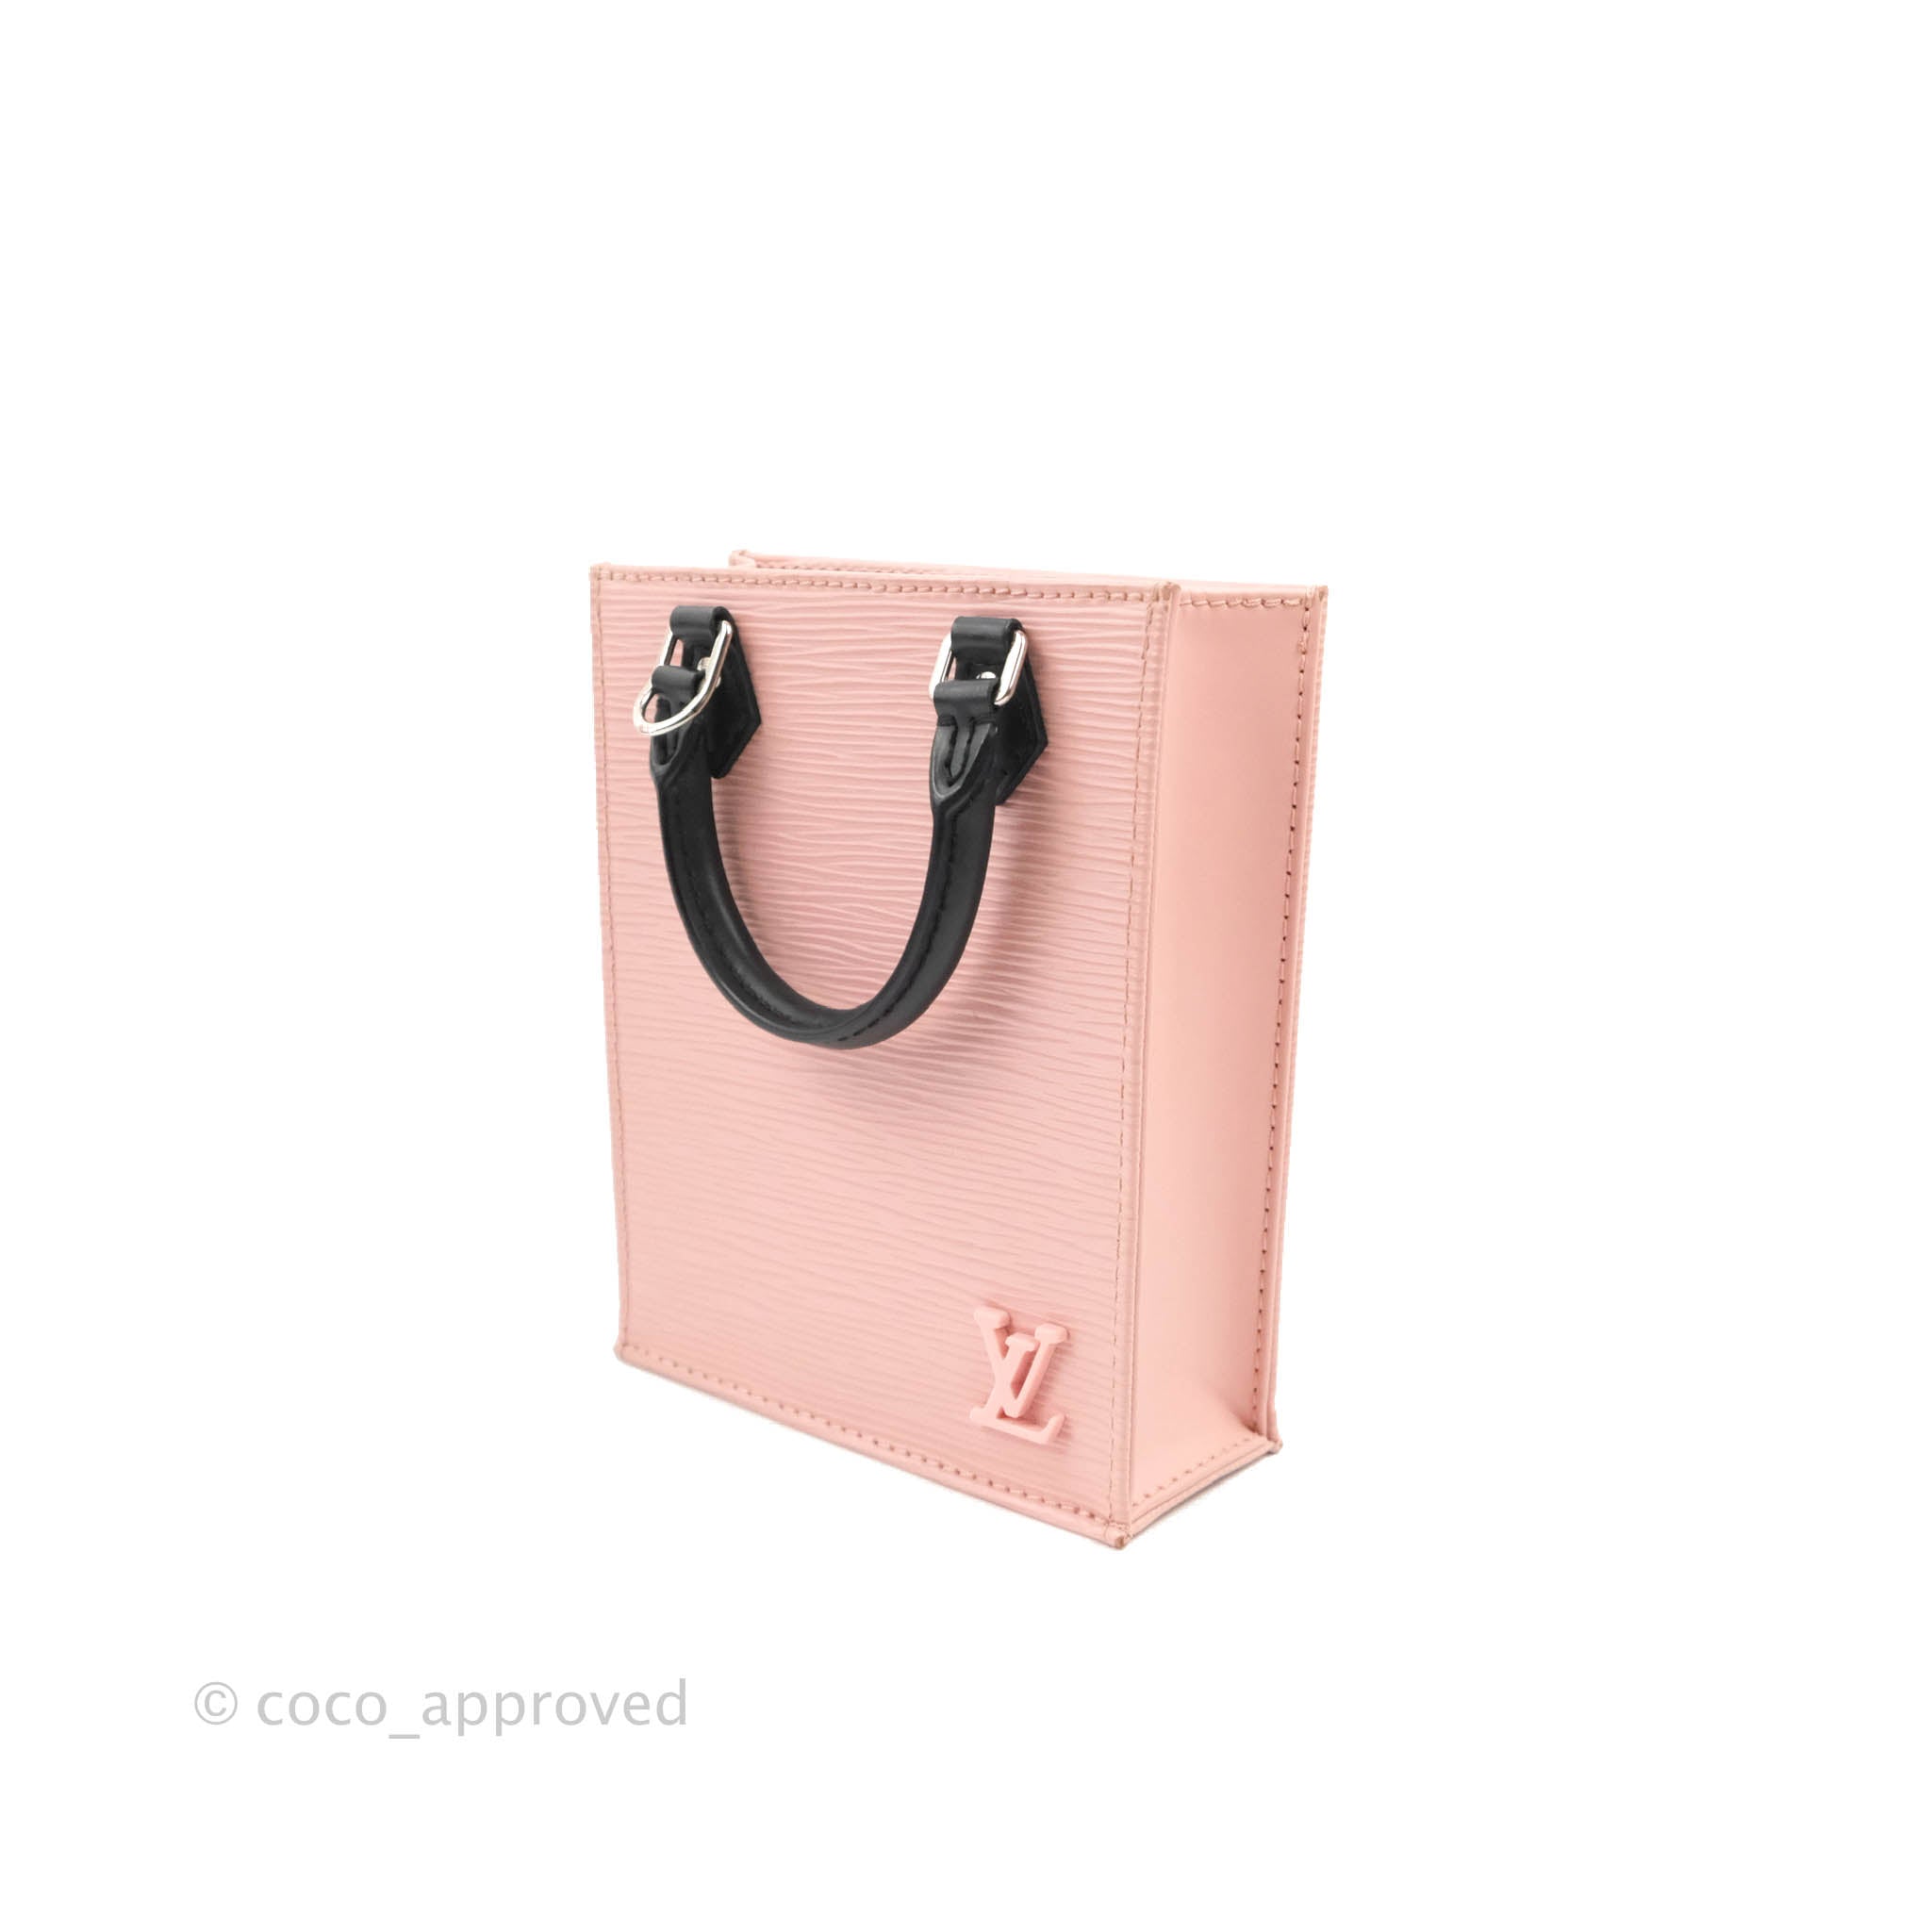 Louis Vuitton Limited Edition Sac Plat Pink in Epi Leather with Silver-tone  - US